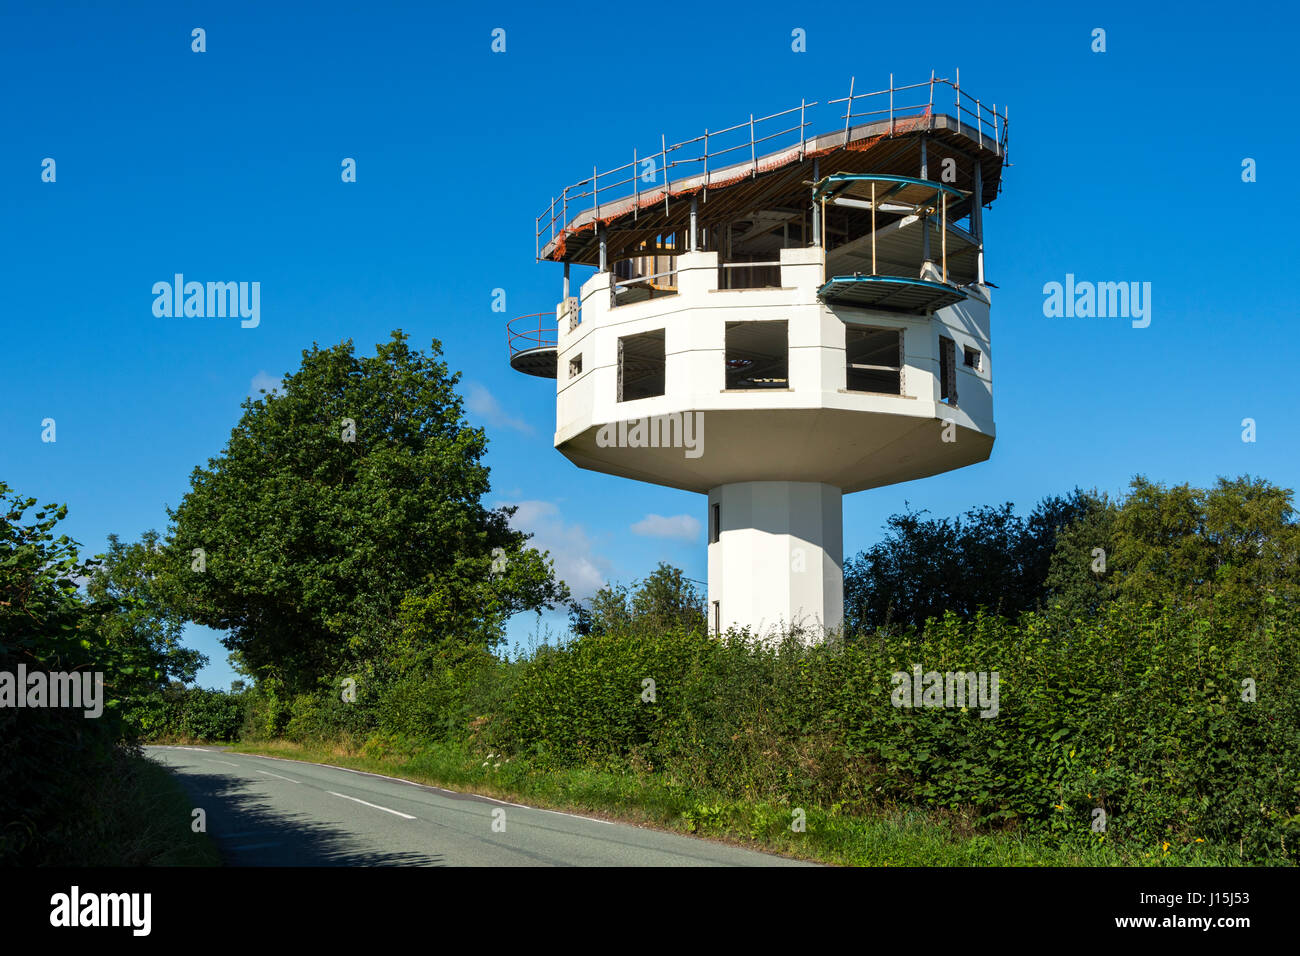 Netchwood Water Tower, was being converted to a home but work has currently stopped (Aug 2016).  Shropshire, England, UK. Stock Photo